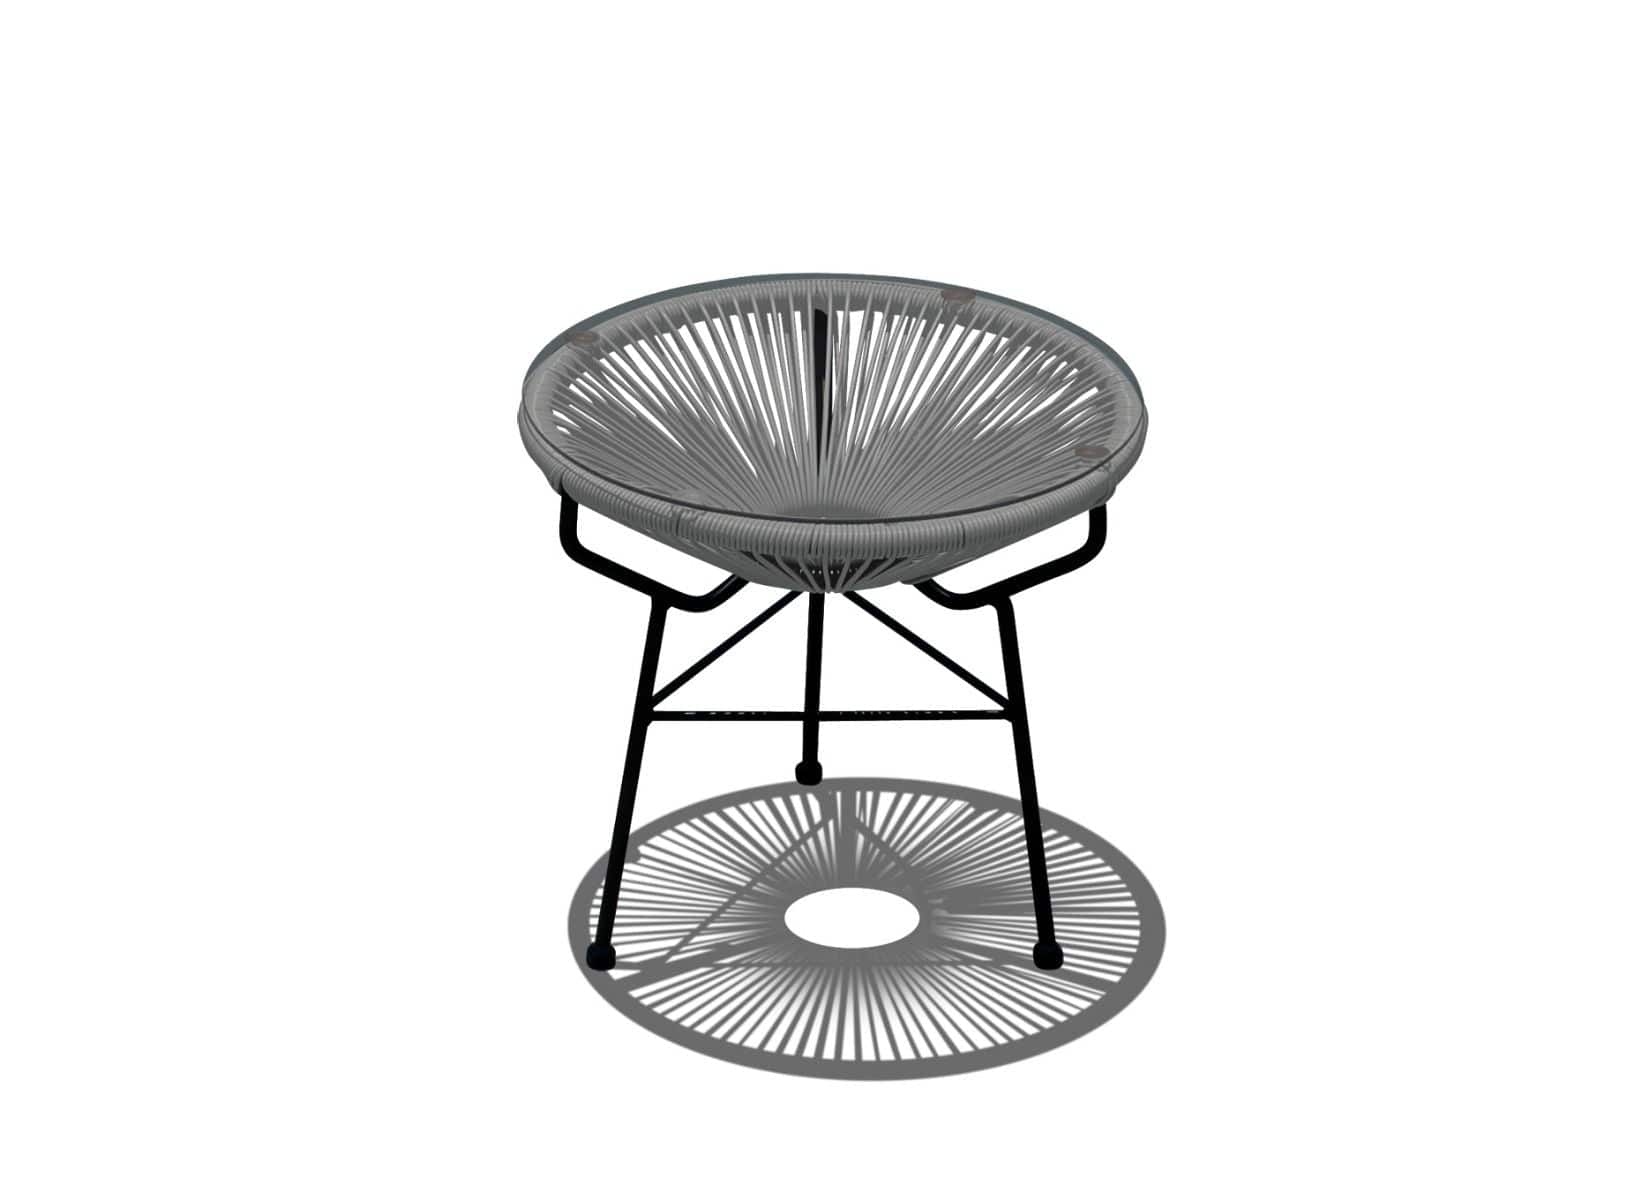 Harmonia Living Outdoor Side Table Space Gray/Black Harmonia Living - Acapulco Side Table/Ottoman